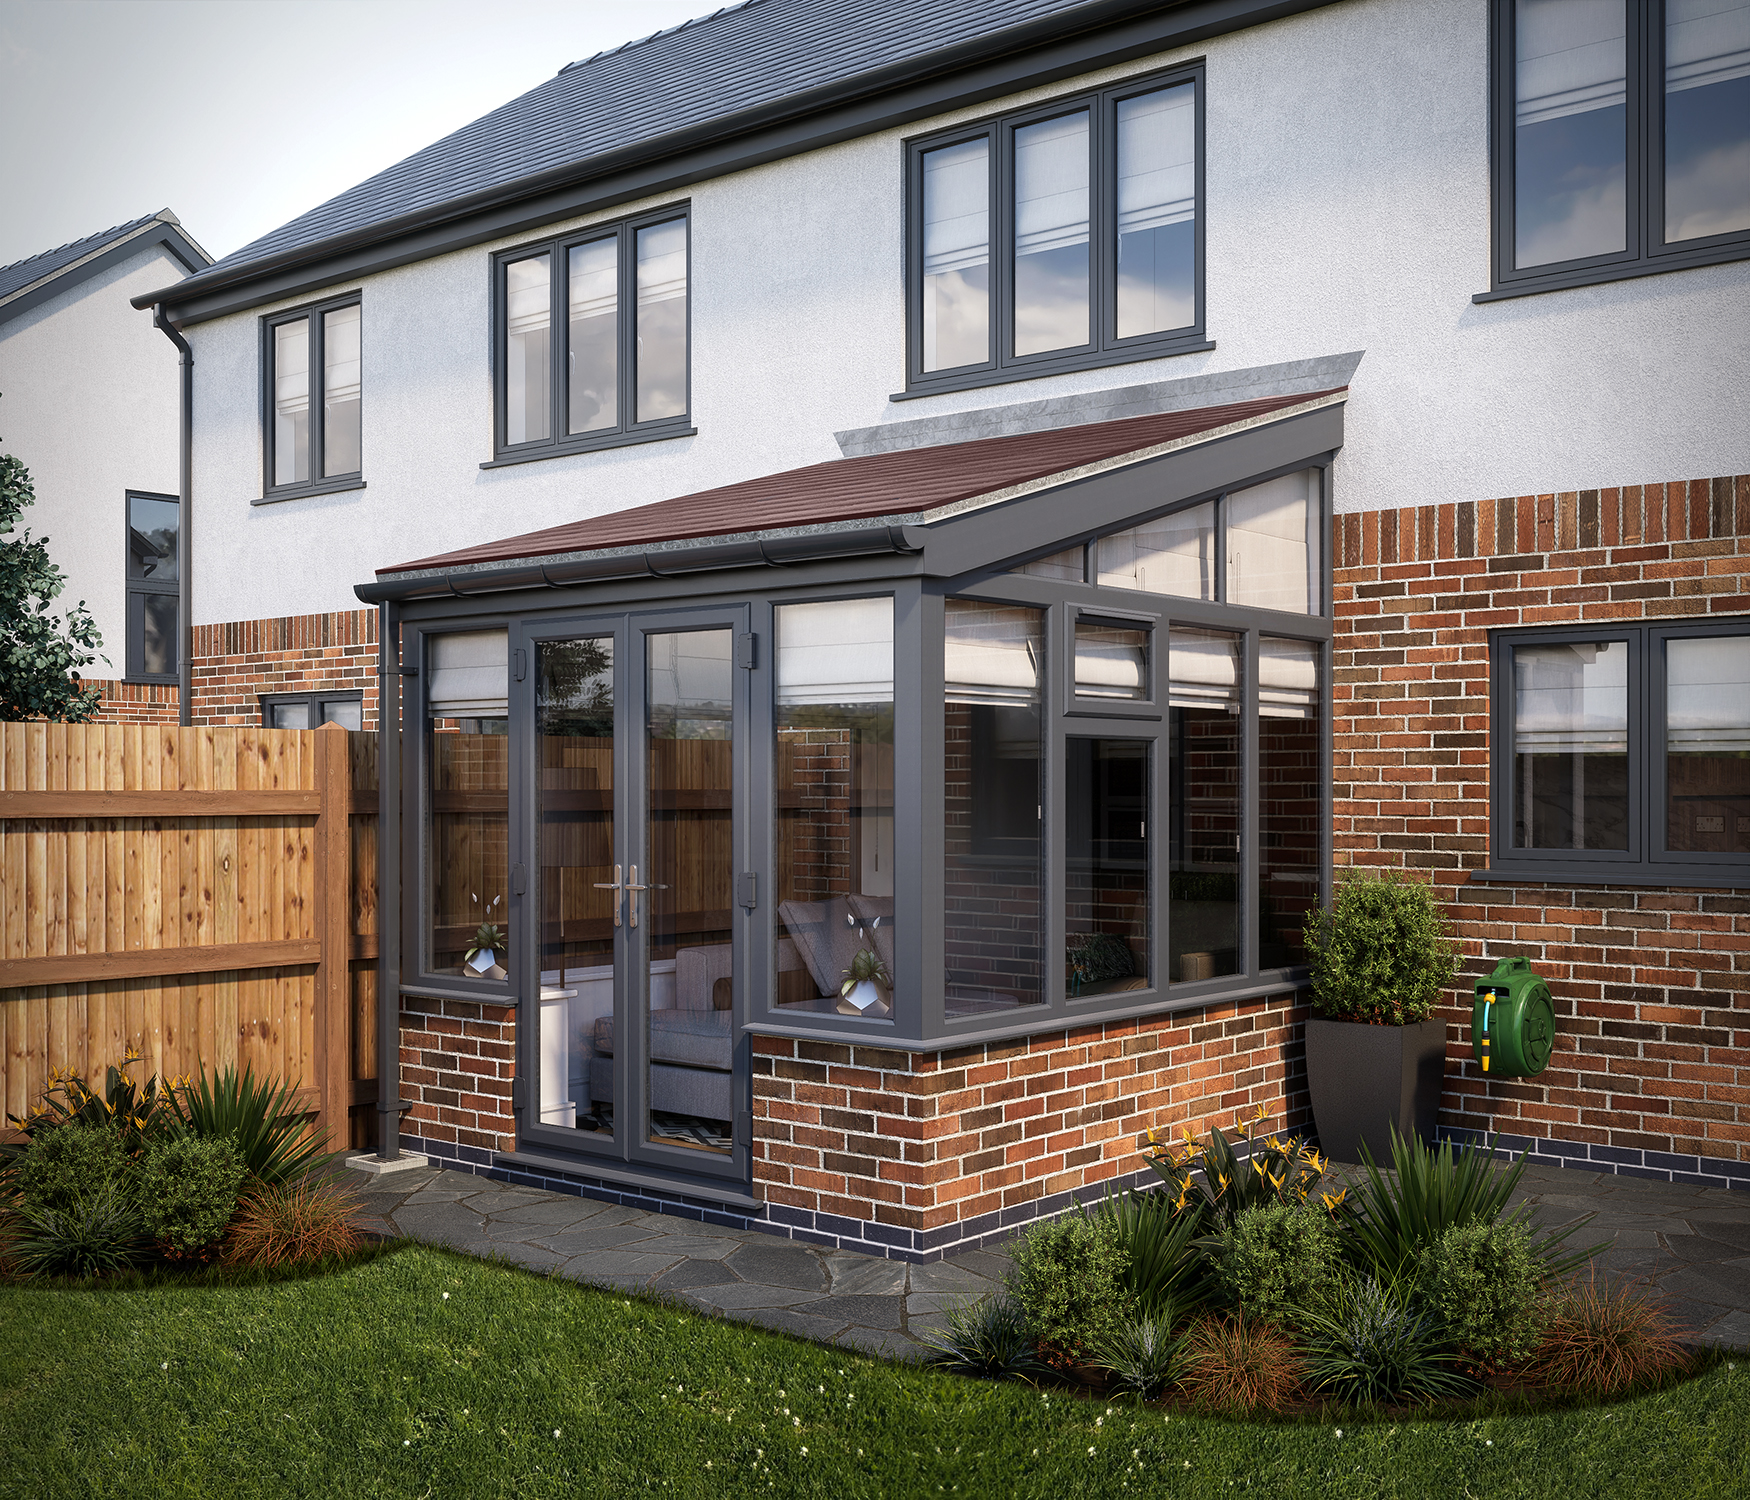 Image of SOLid Roof Lean to Conservatory Grey Frames Dwarf Wall with Rustic Brown Tiles - 13 x 10ft